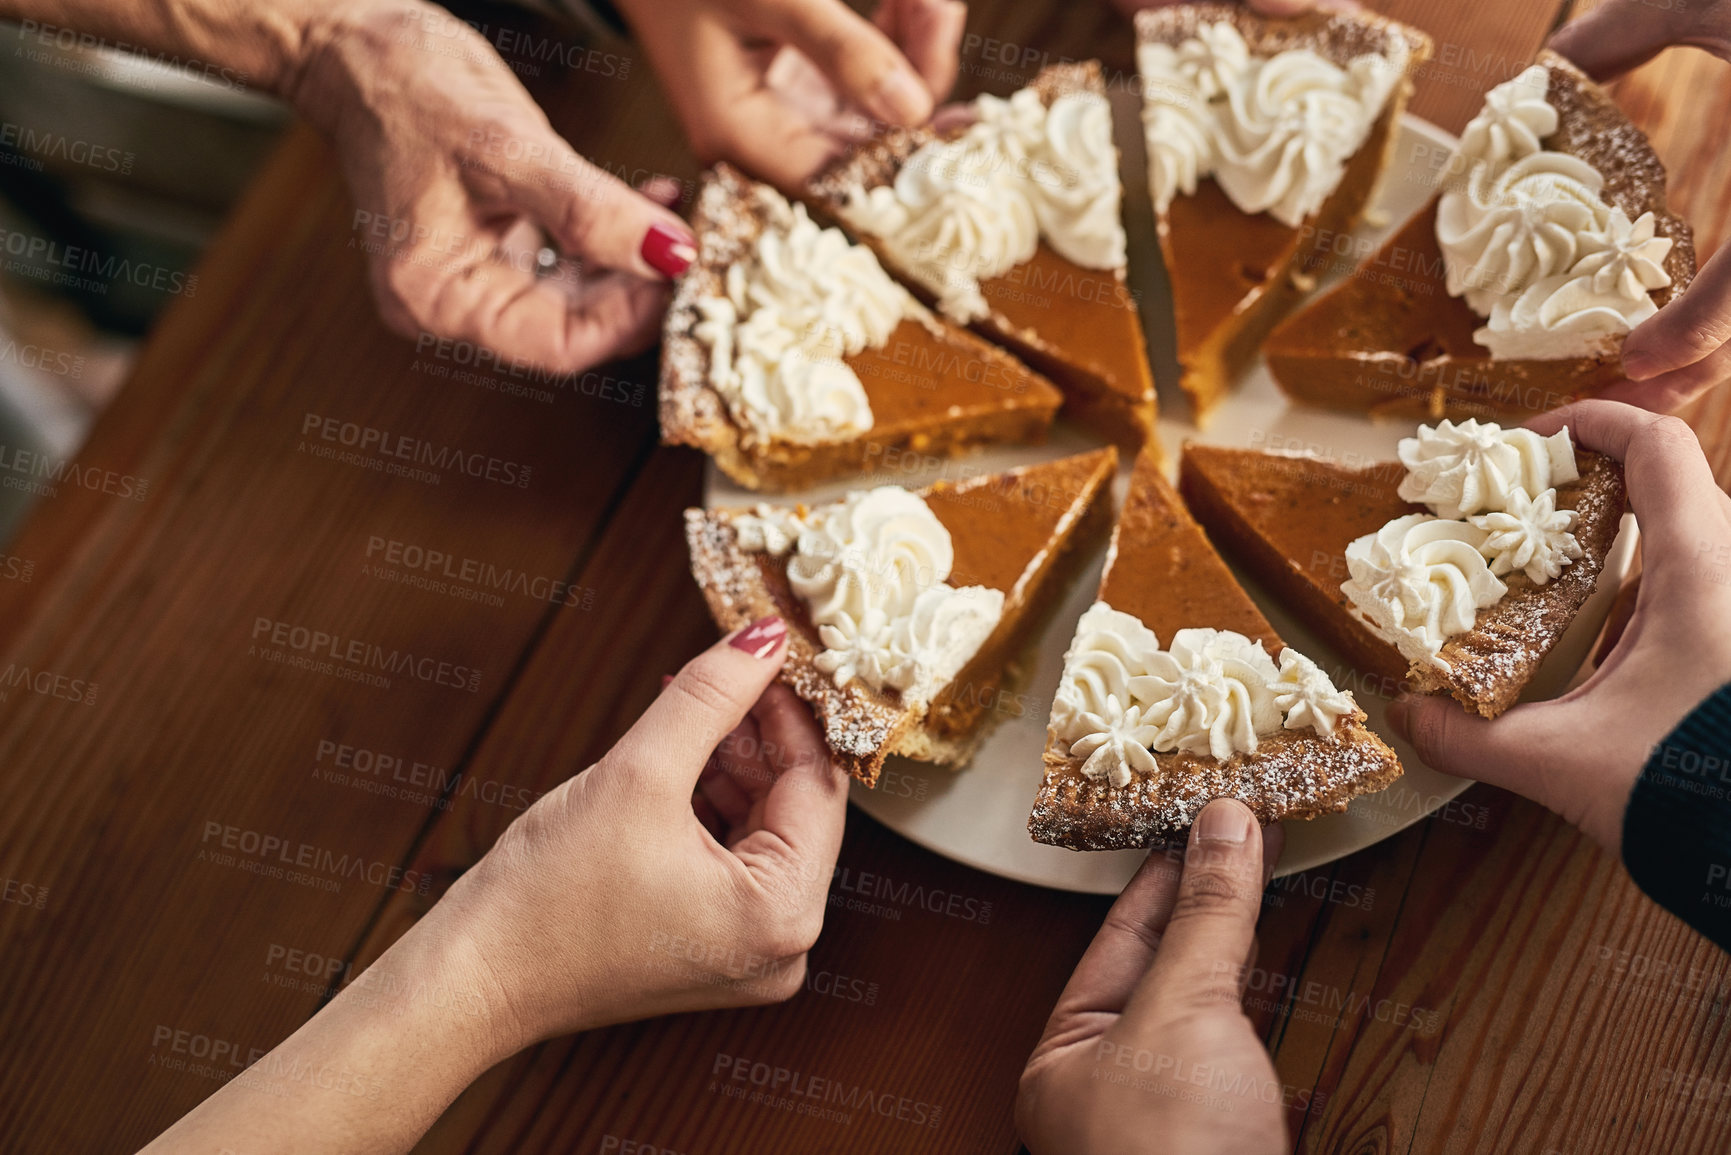 Buy stock photo Family, hands and pumpkin pie by people in celebration of thanksgiving, fun and social gathering at a table closeup. Hand, cake and friends share traditional dessert at an event, party or function 